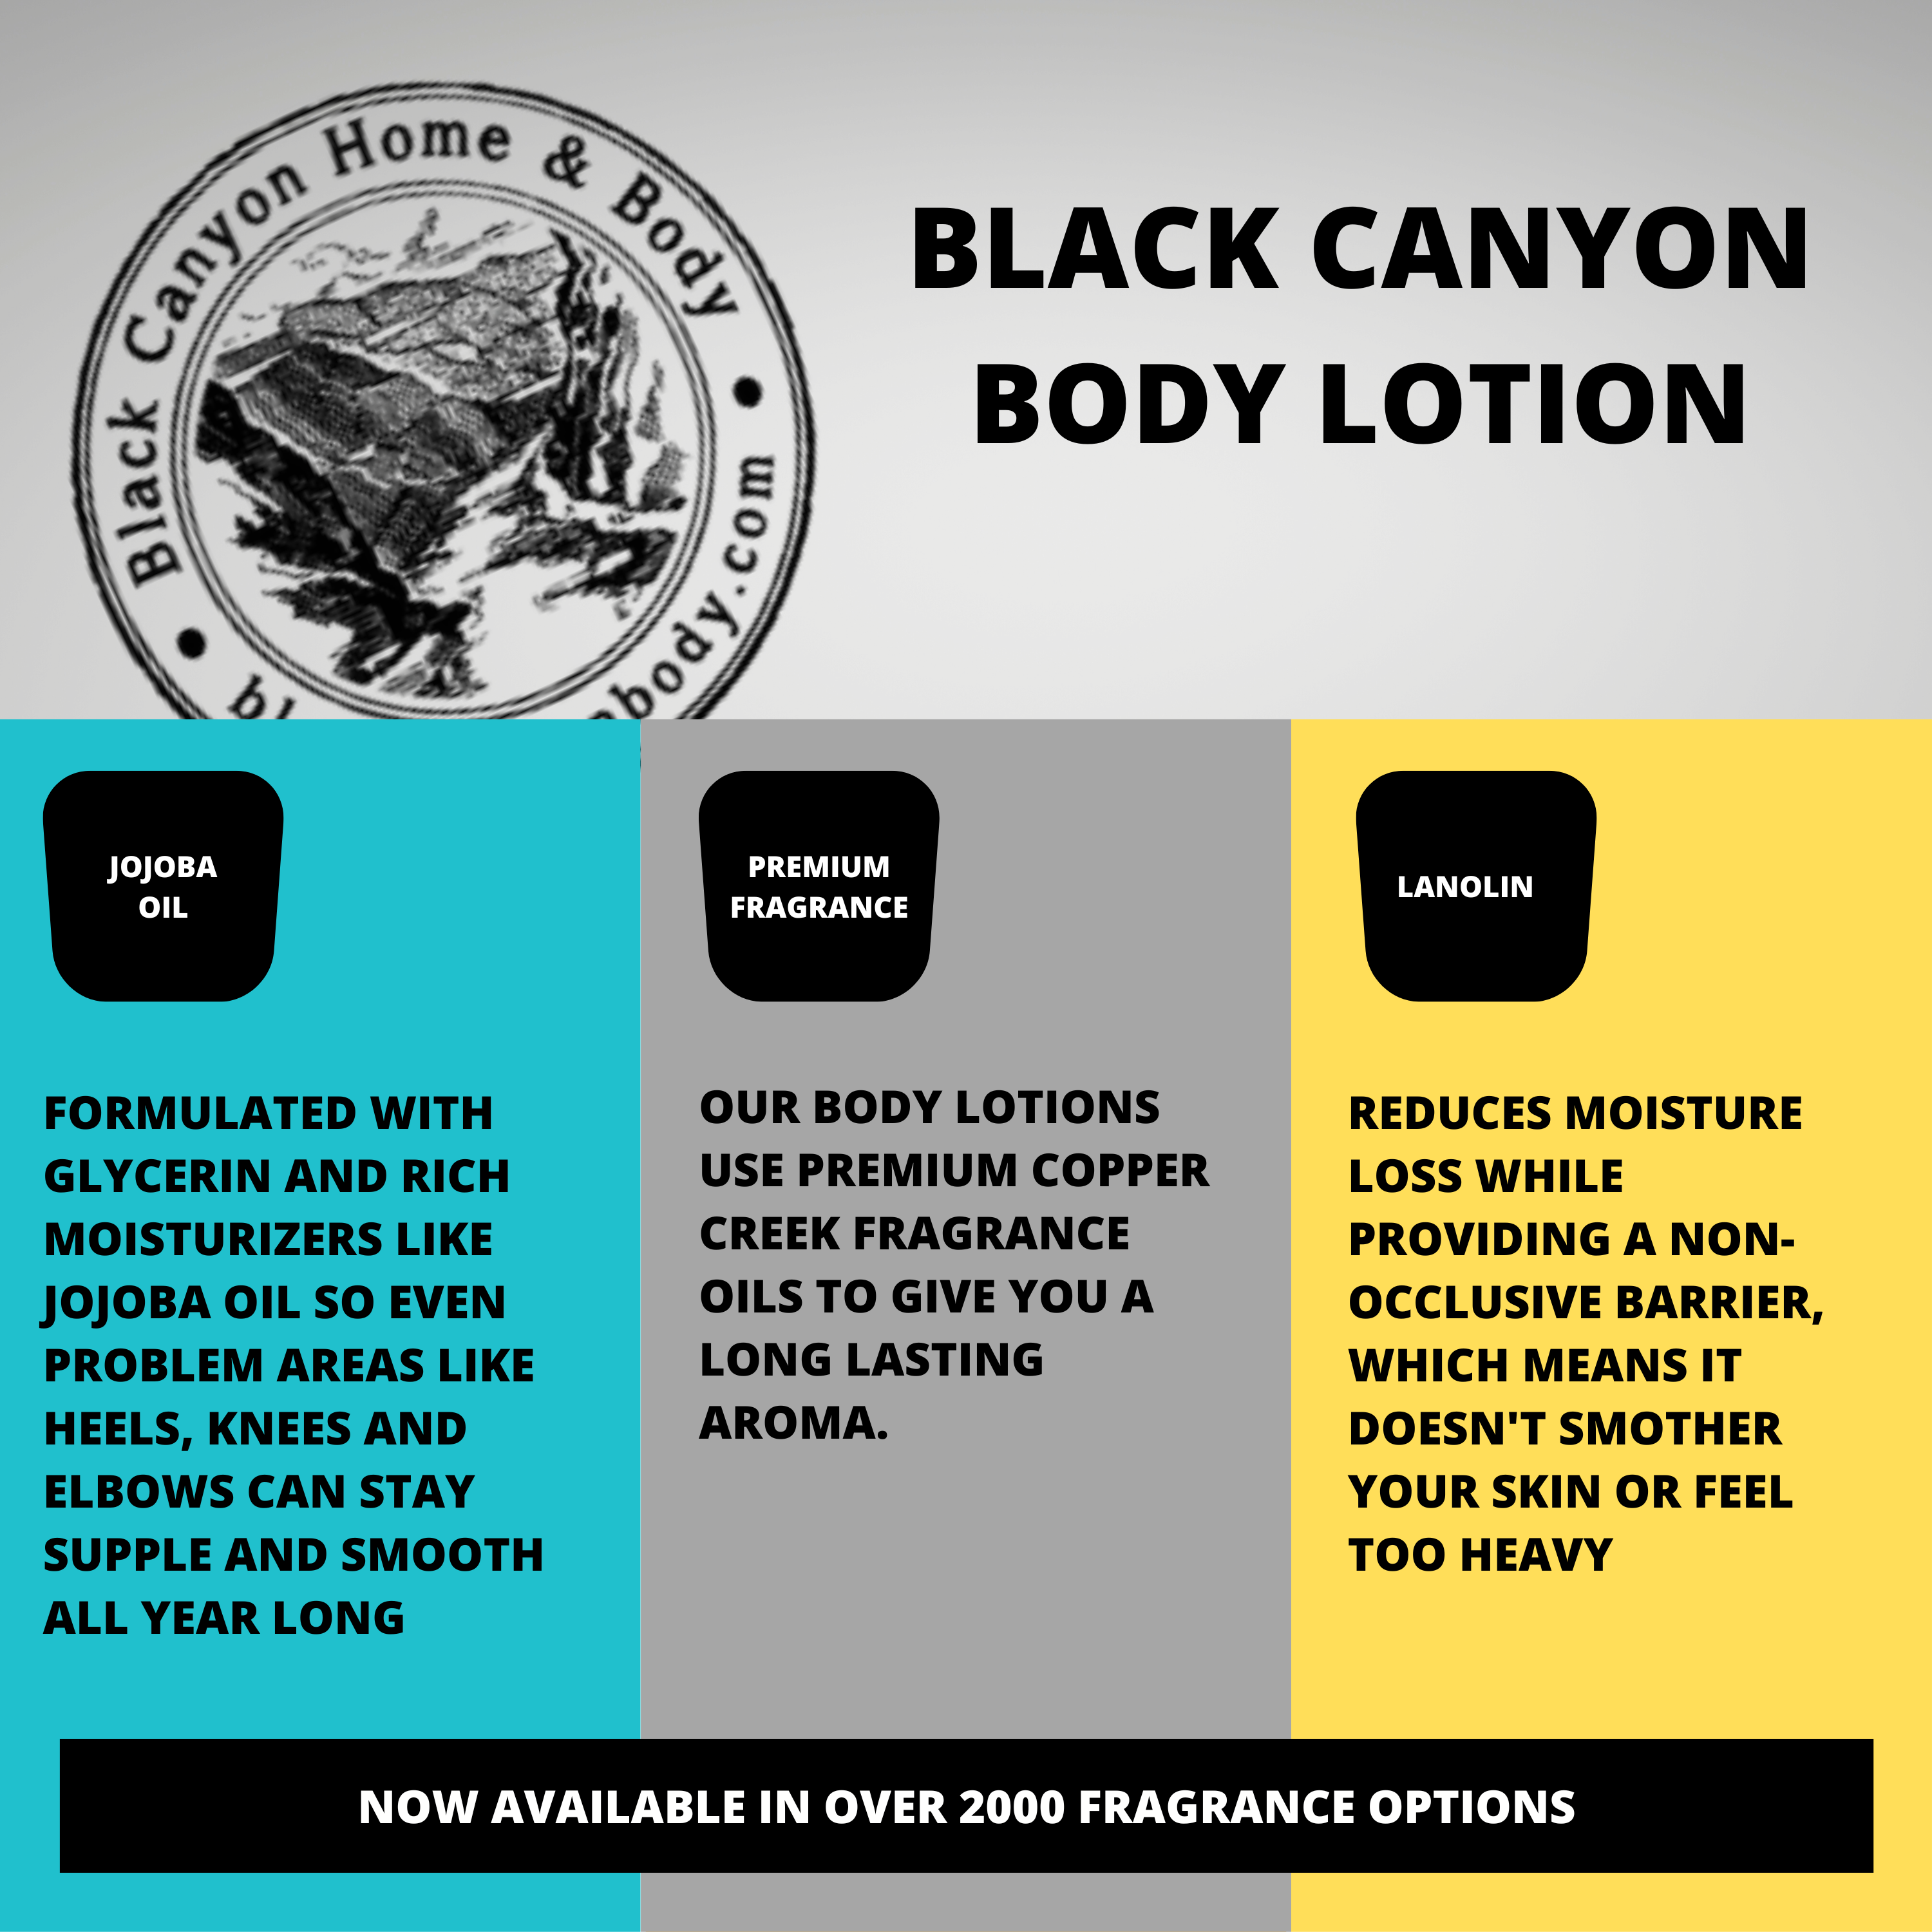 Black Canyon Apples & Oranges Scented Luxury Body Lotion with Lanolin and Jojoba Oil